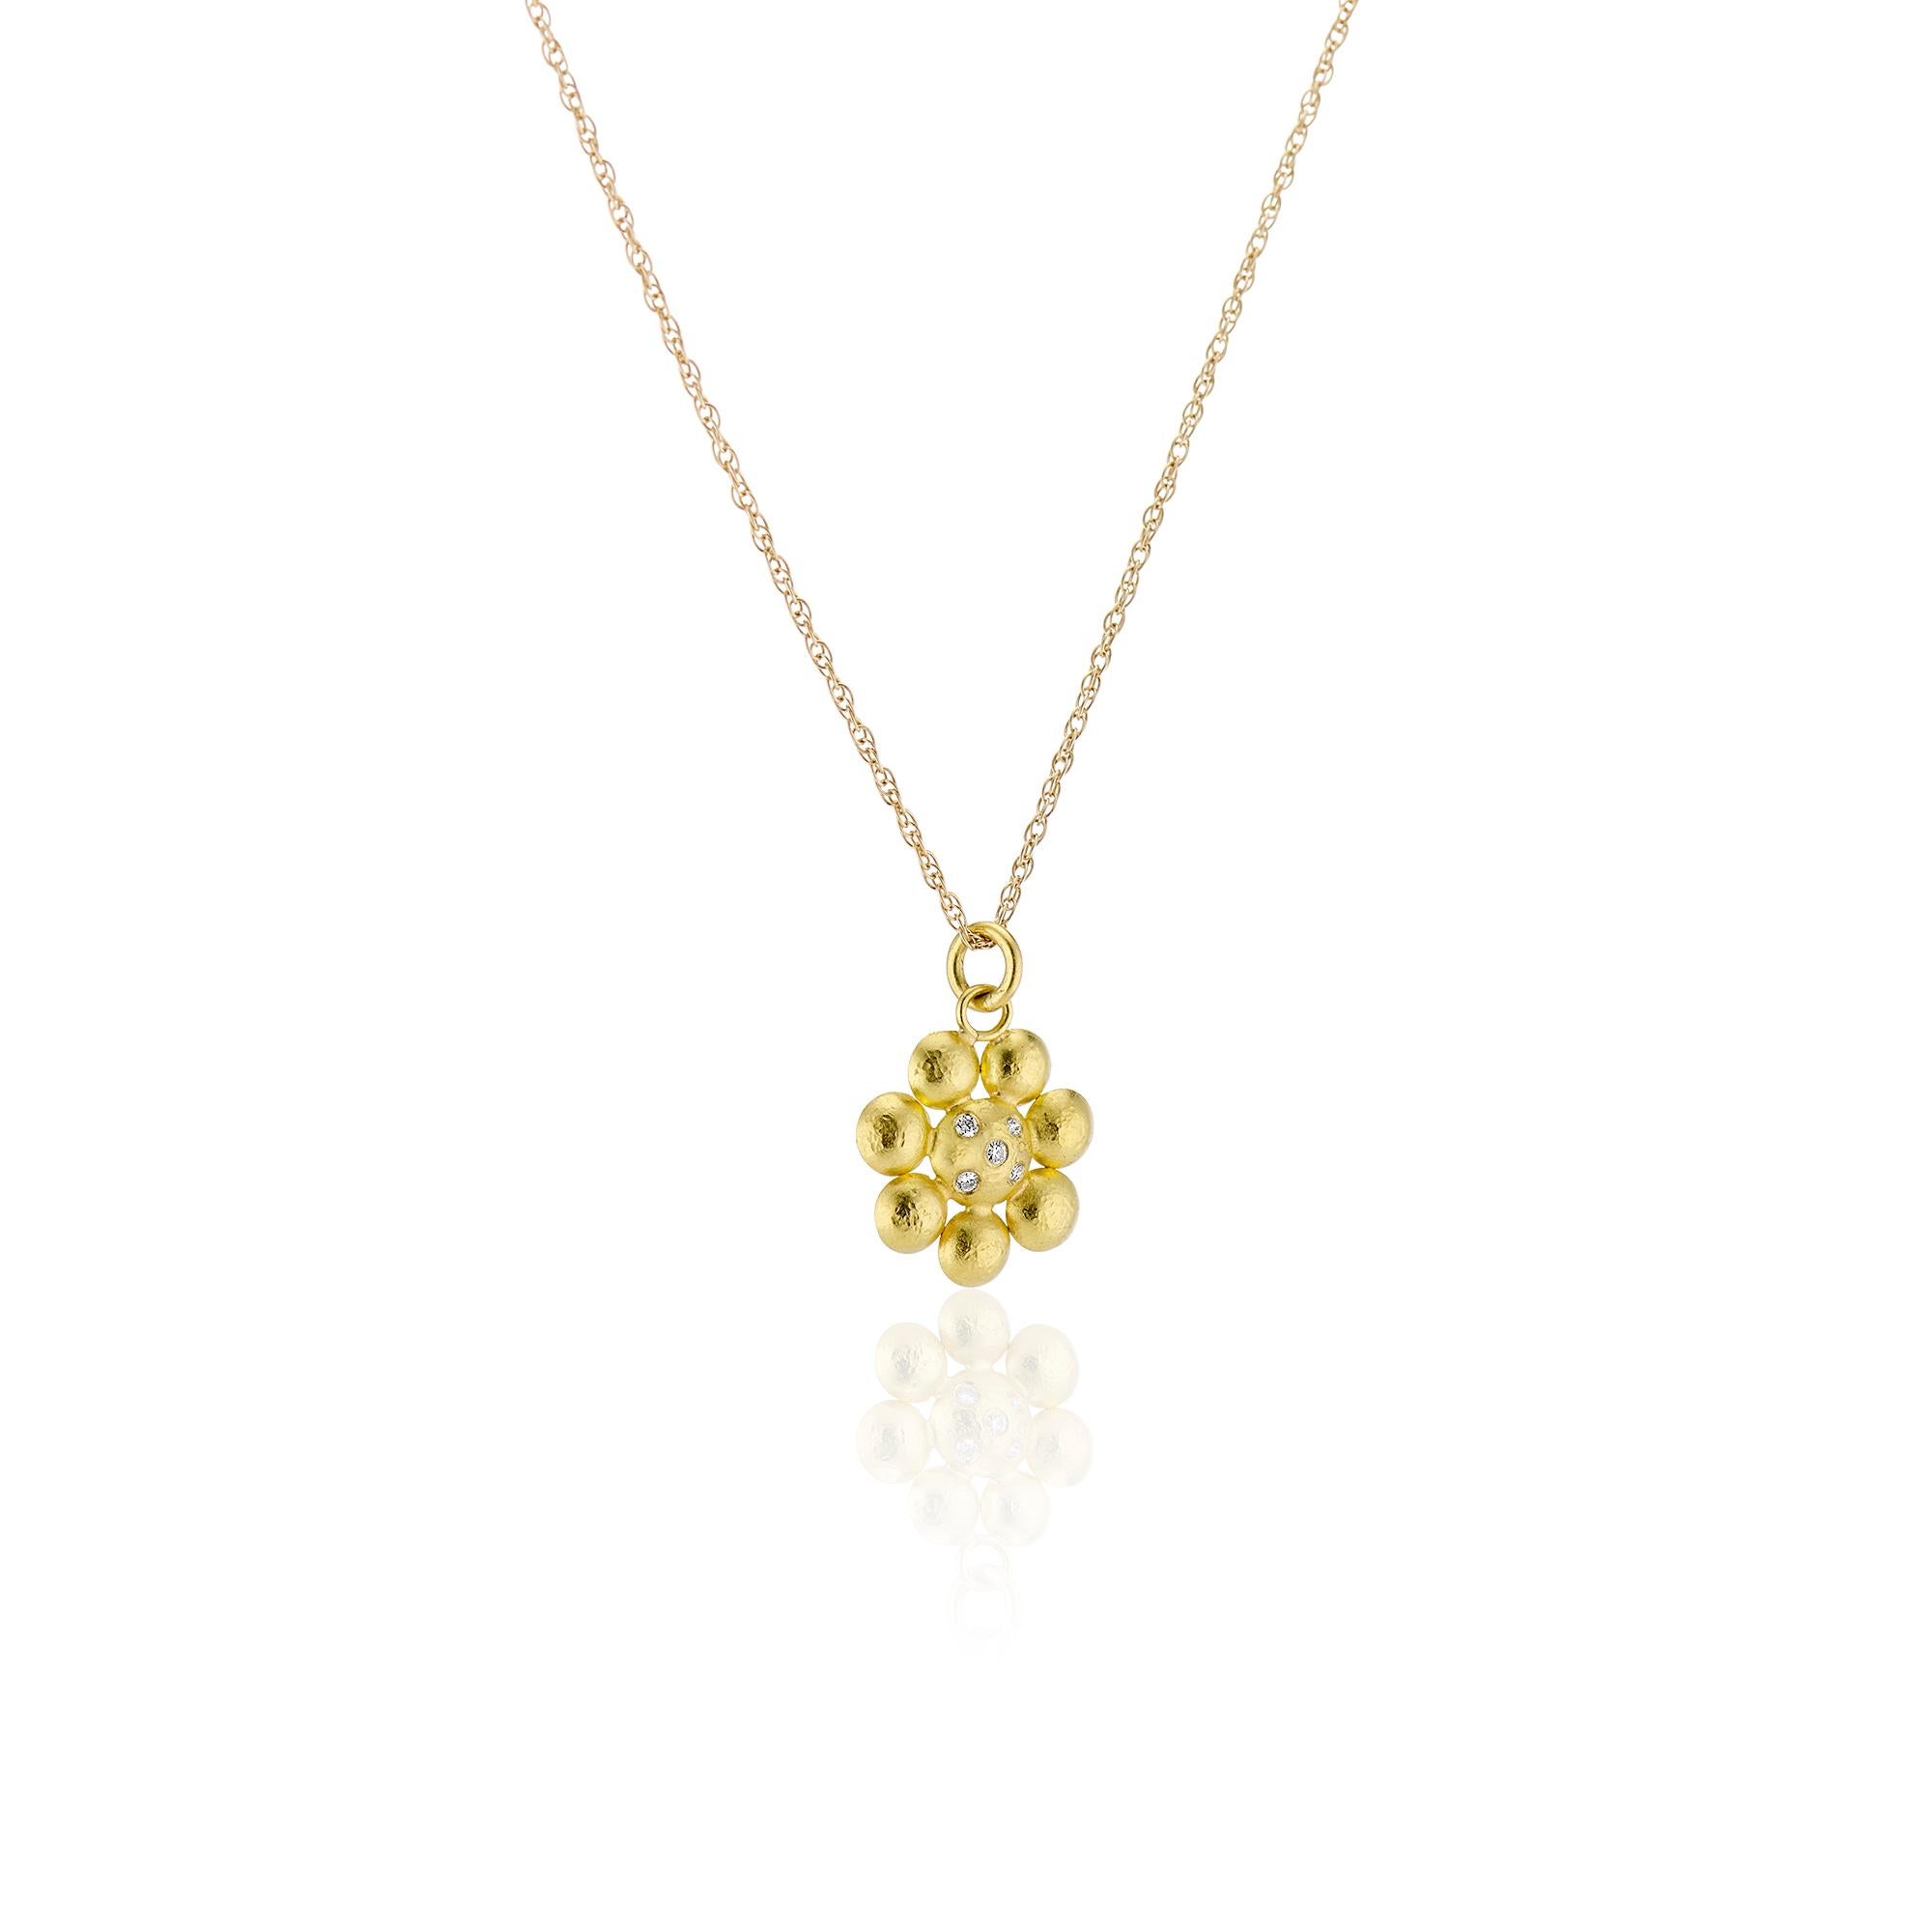 Contemporary Diamond and Yellow Gold Rosette Flower Charm Pendant Necklace, Yellow Gold Chain For Sale